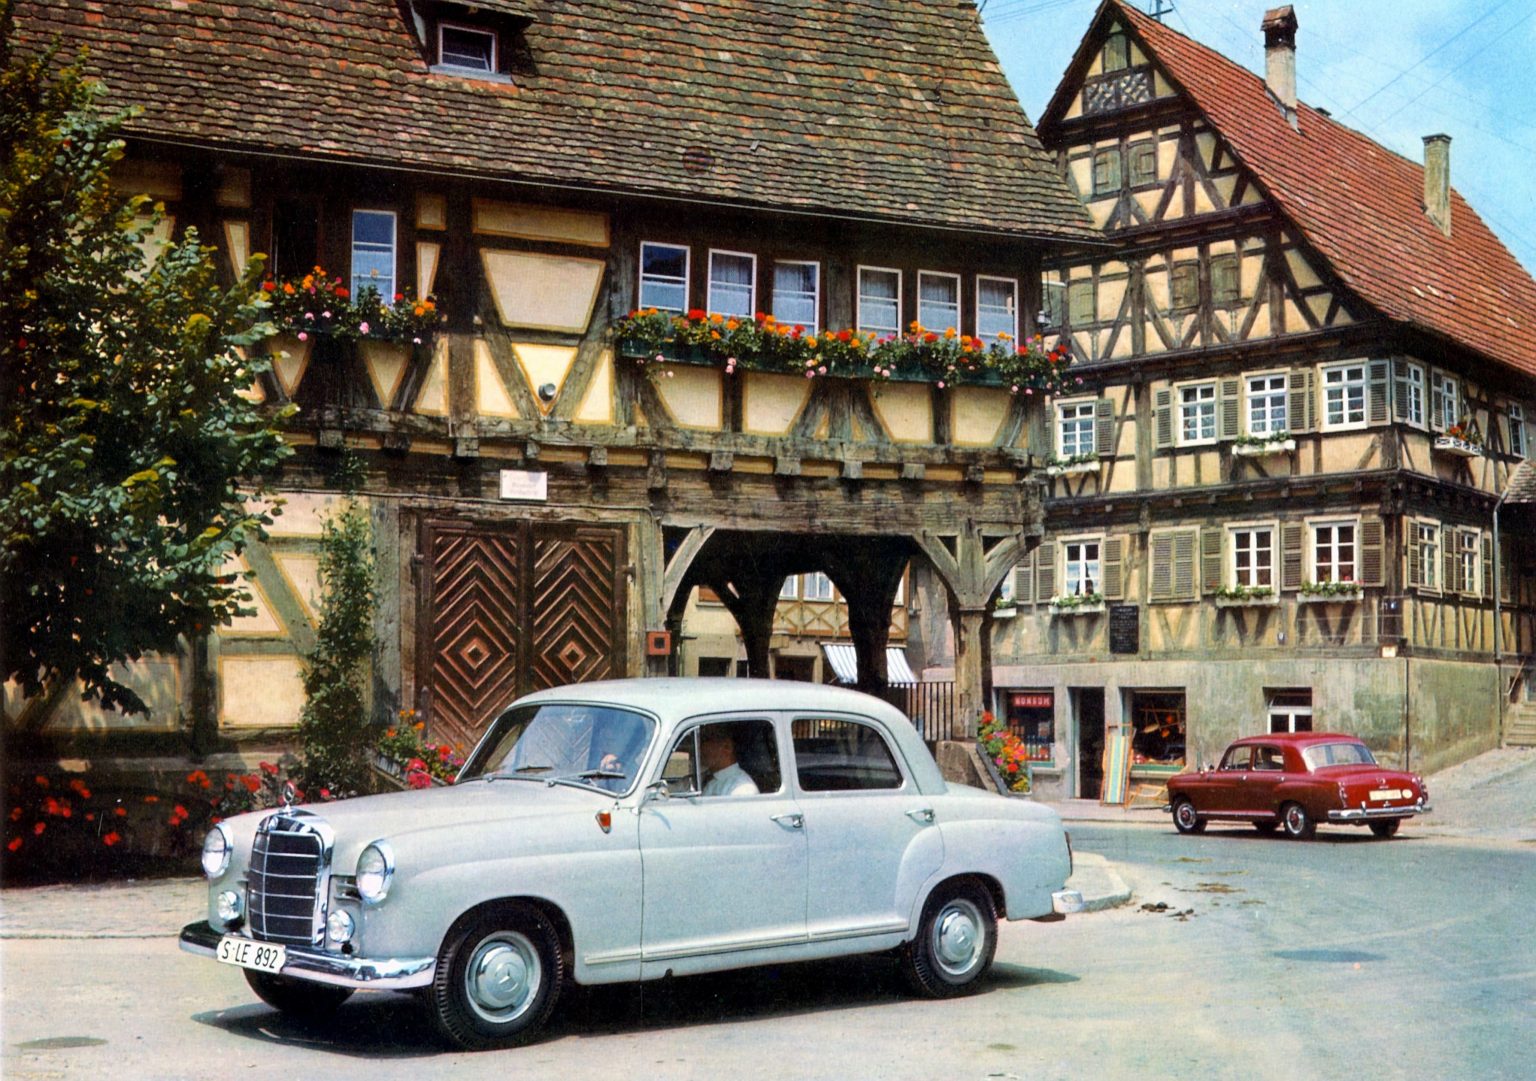 Star of the Heimatfilm (sentimental films in idealised regional settings popular in the 50s): "Ponton Mercedes" saloon (Mercedes-Benz 120/121 series, 1953 to 1962) against a half-timbered house backdrop.